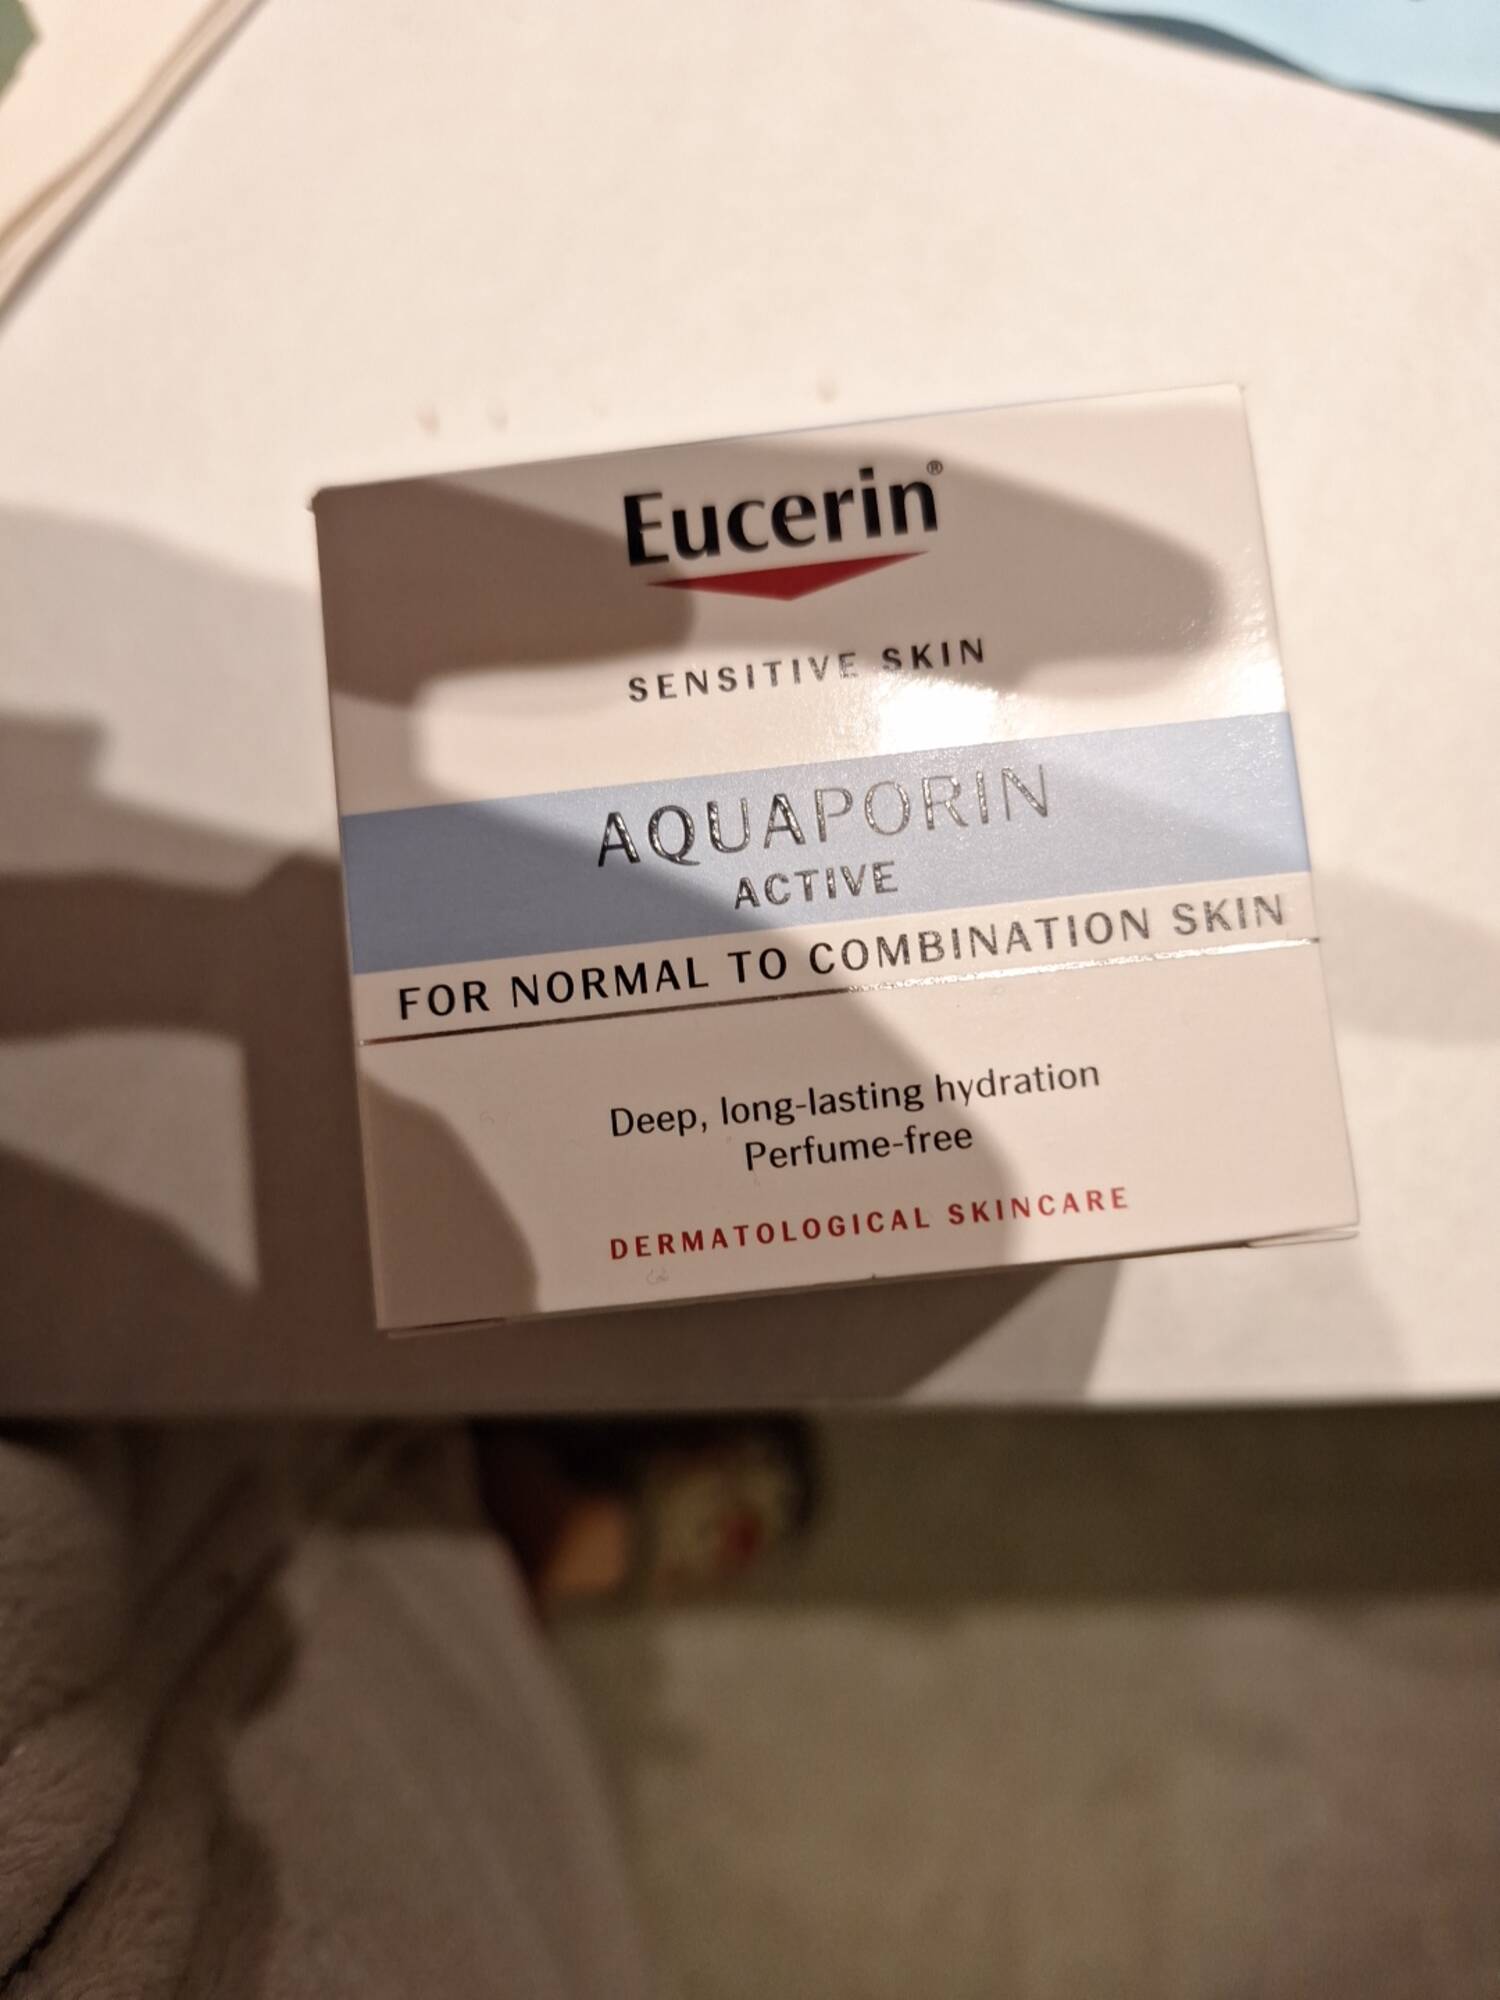 EUCERIN - Aquaporin active for normal to combination skin